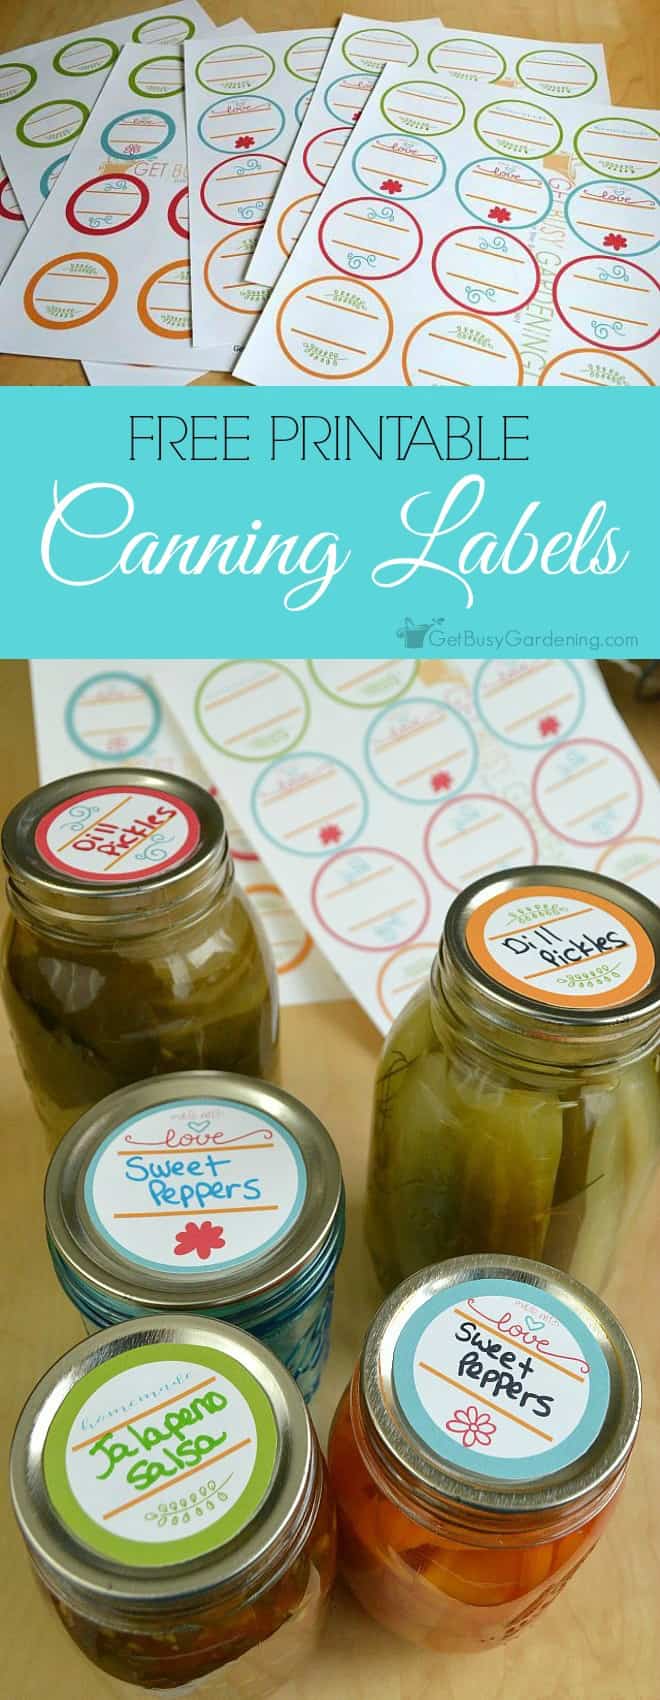 printable-canning-labels-free-downloadable-labels-for-mason-jars